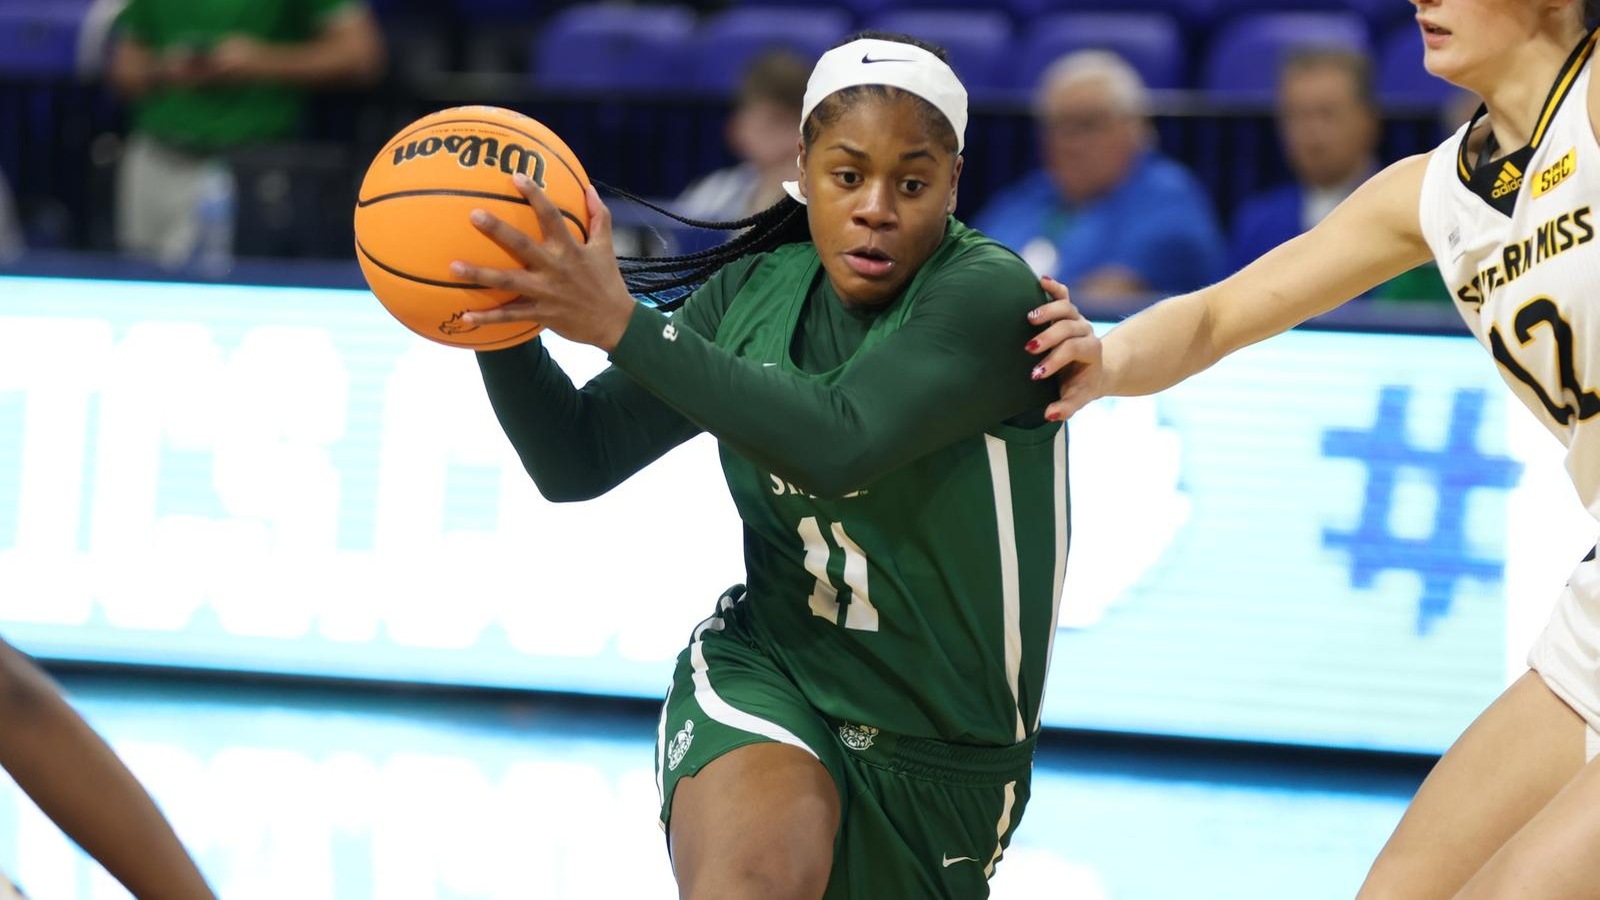 Cleveland State Women’s Basketball Finishes FGCU Tournament With 69-59 Victory Over Drexel